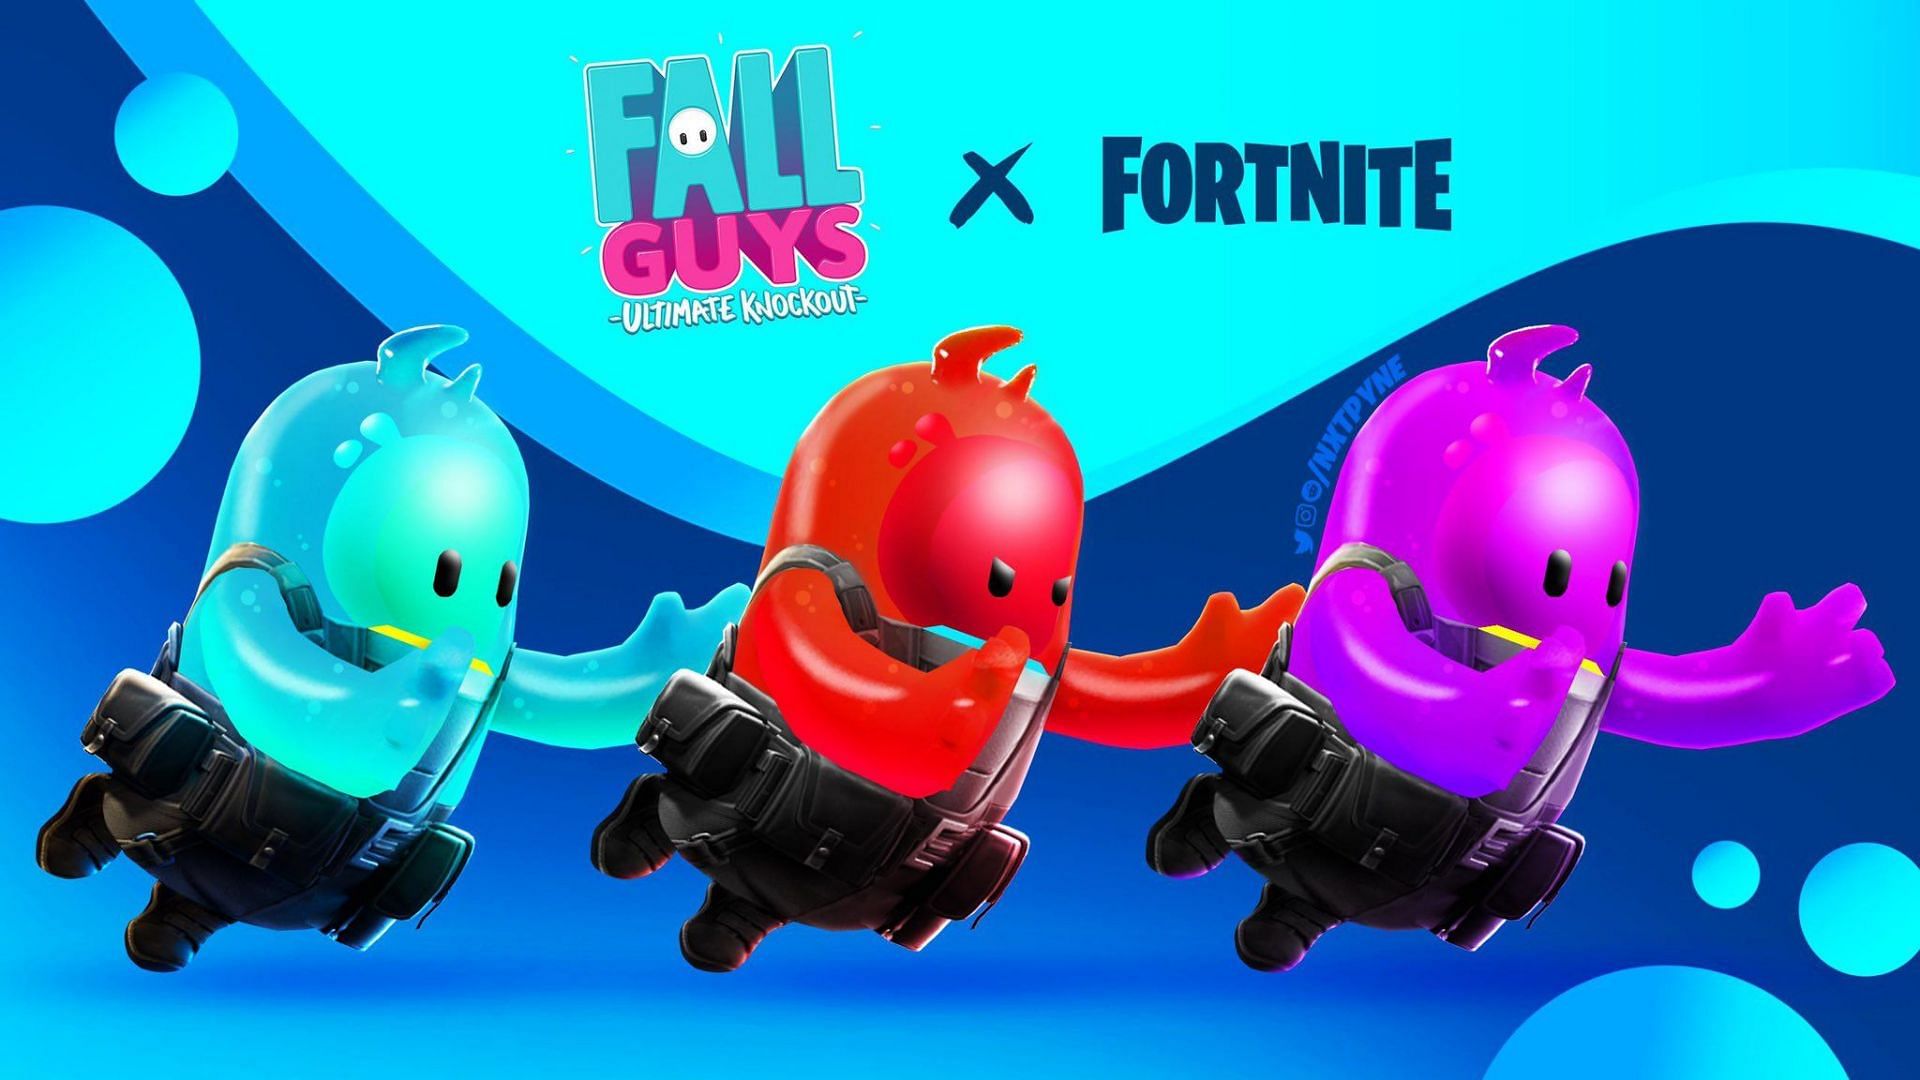 Fortnite Fall Guys collaboration could be back on the table, suggest new leaks